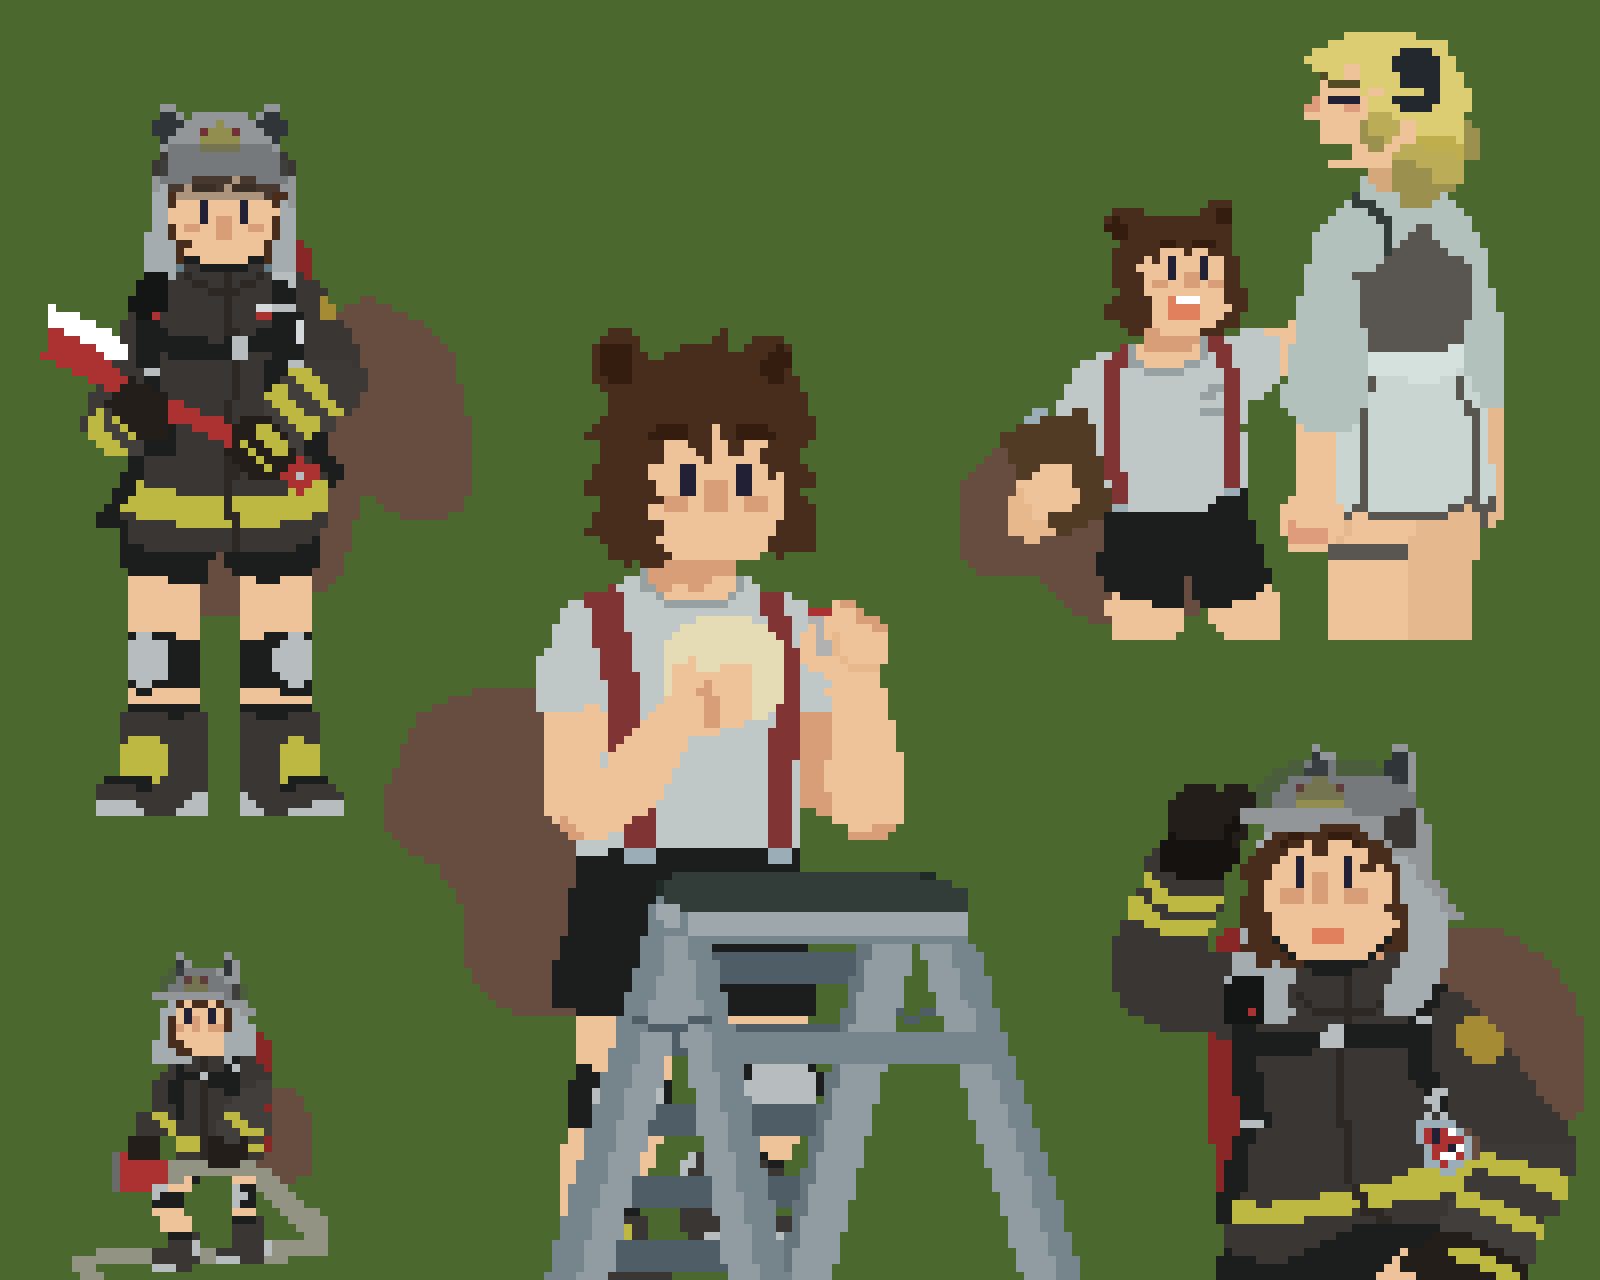 a collection of pixel art animations featuring shaw. they depict her standing with a fire axe, blinking; putting batteries in a fire detector; holding a dripping fire hose; adjusting her helmet while sweating a bit; and instructing an annoyed ifrit on fire safety.